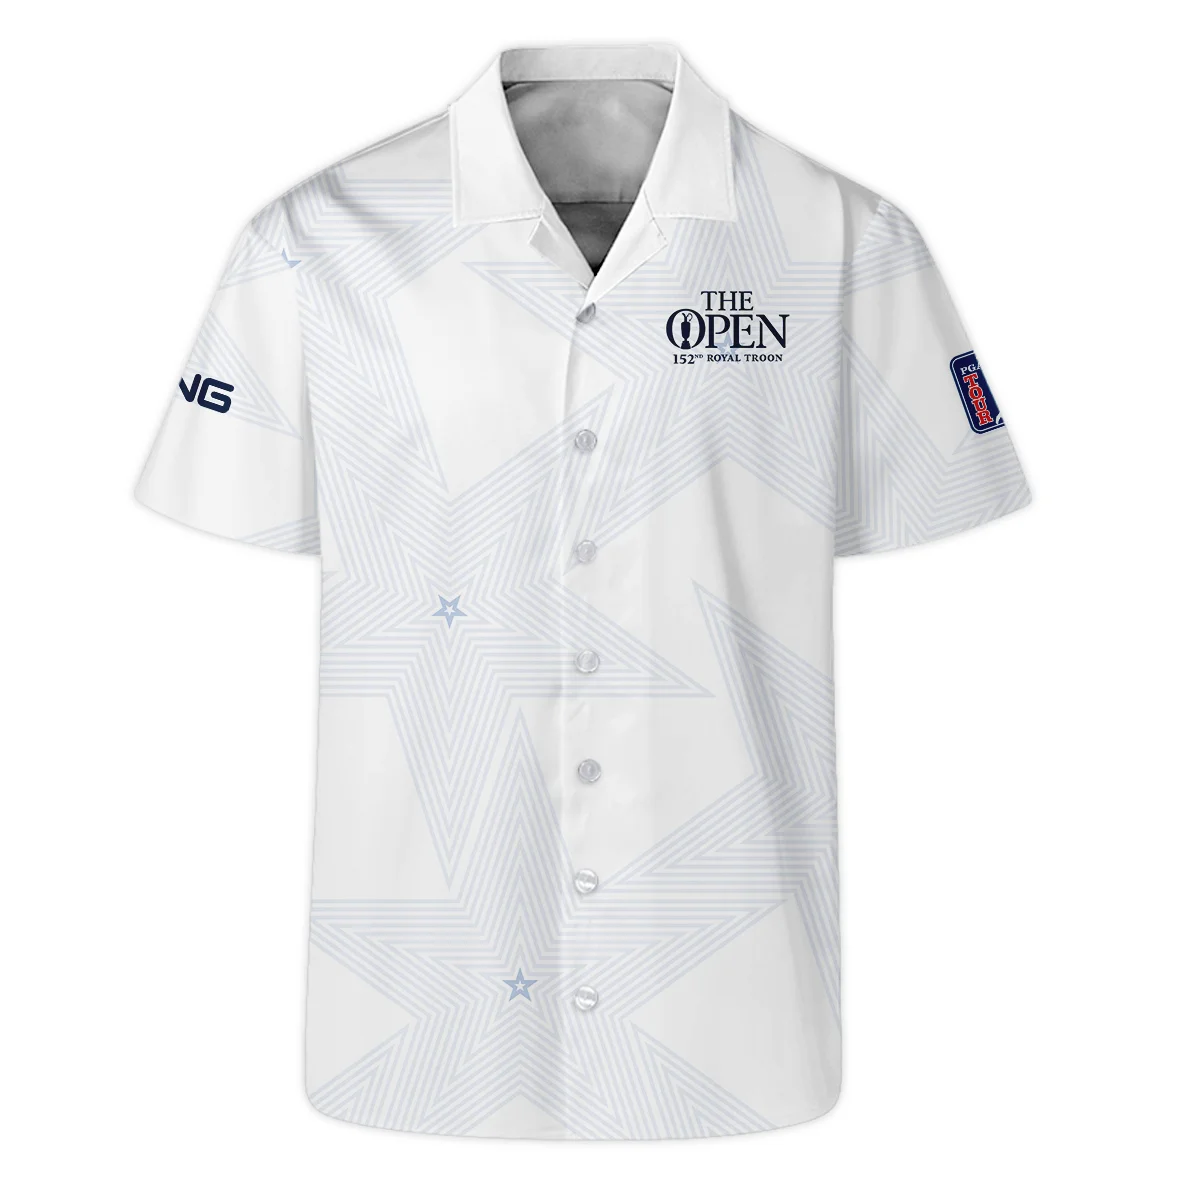 152nd The Open Championship Golf Ping Long Polo Shirt Stars White Navy Golf Sports All Over Print Long Polo Shirt For Men